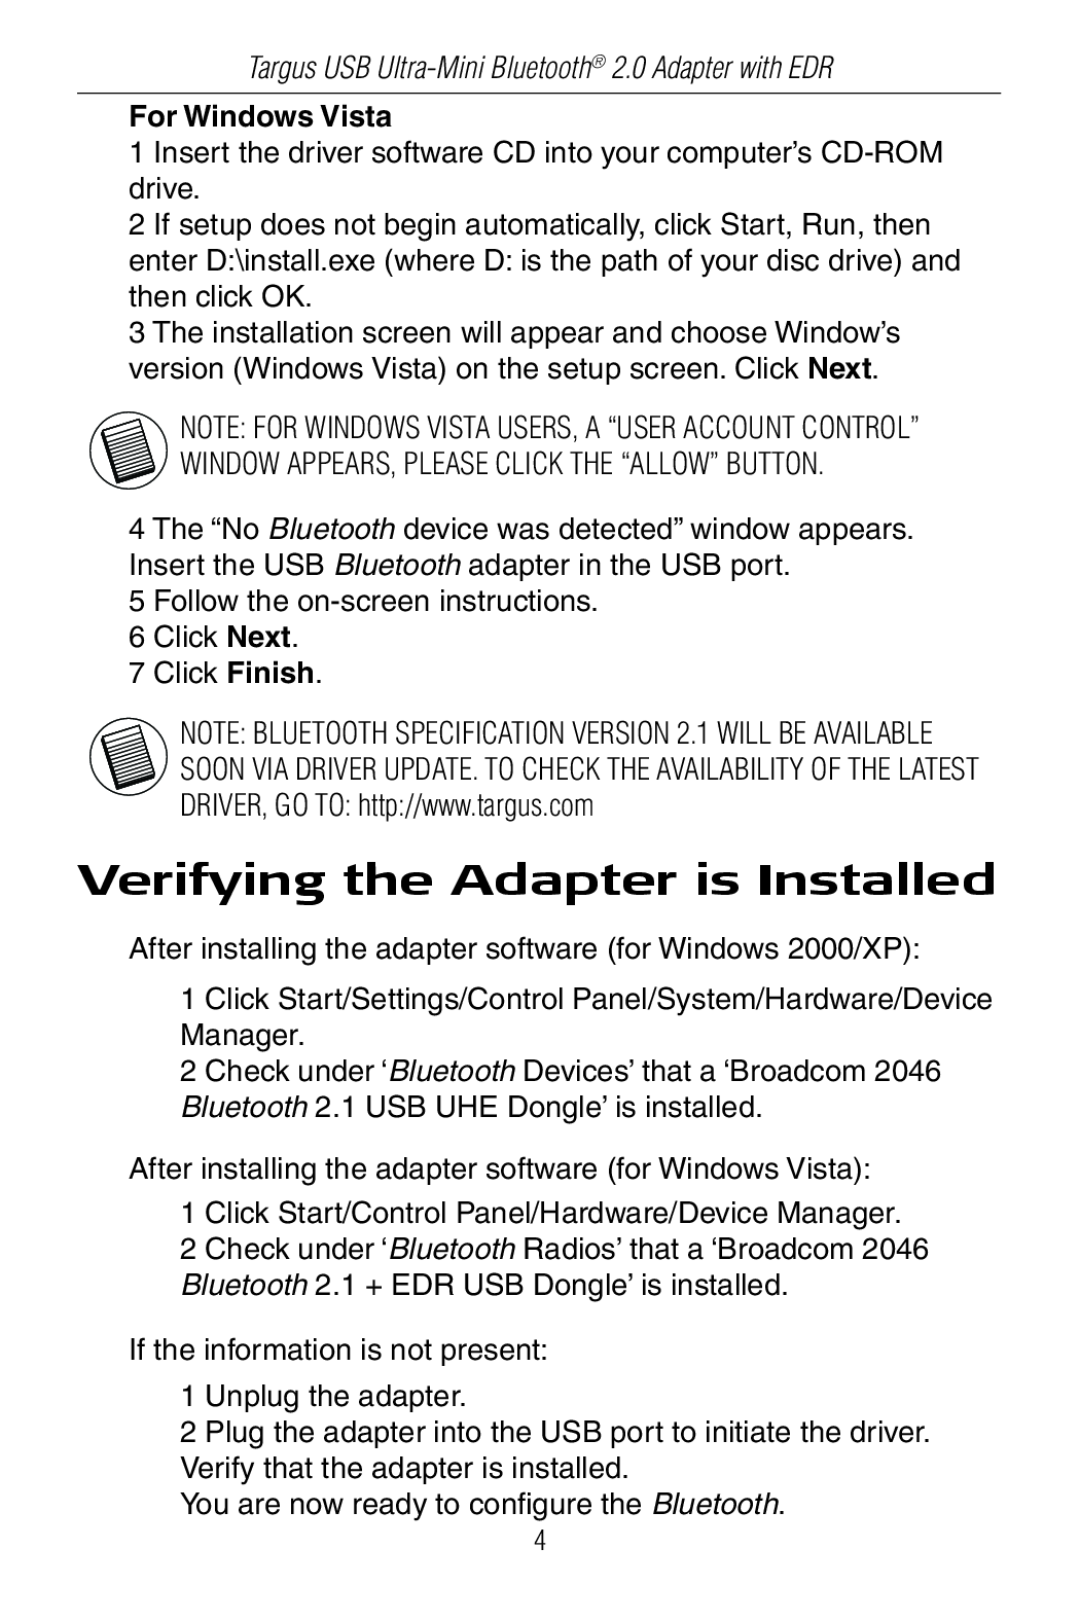 Targus Mini Bluetooth 2.0 Adapter with DER specifications Verifying the Adapter is Installed, For Windows Vista 